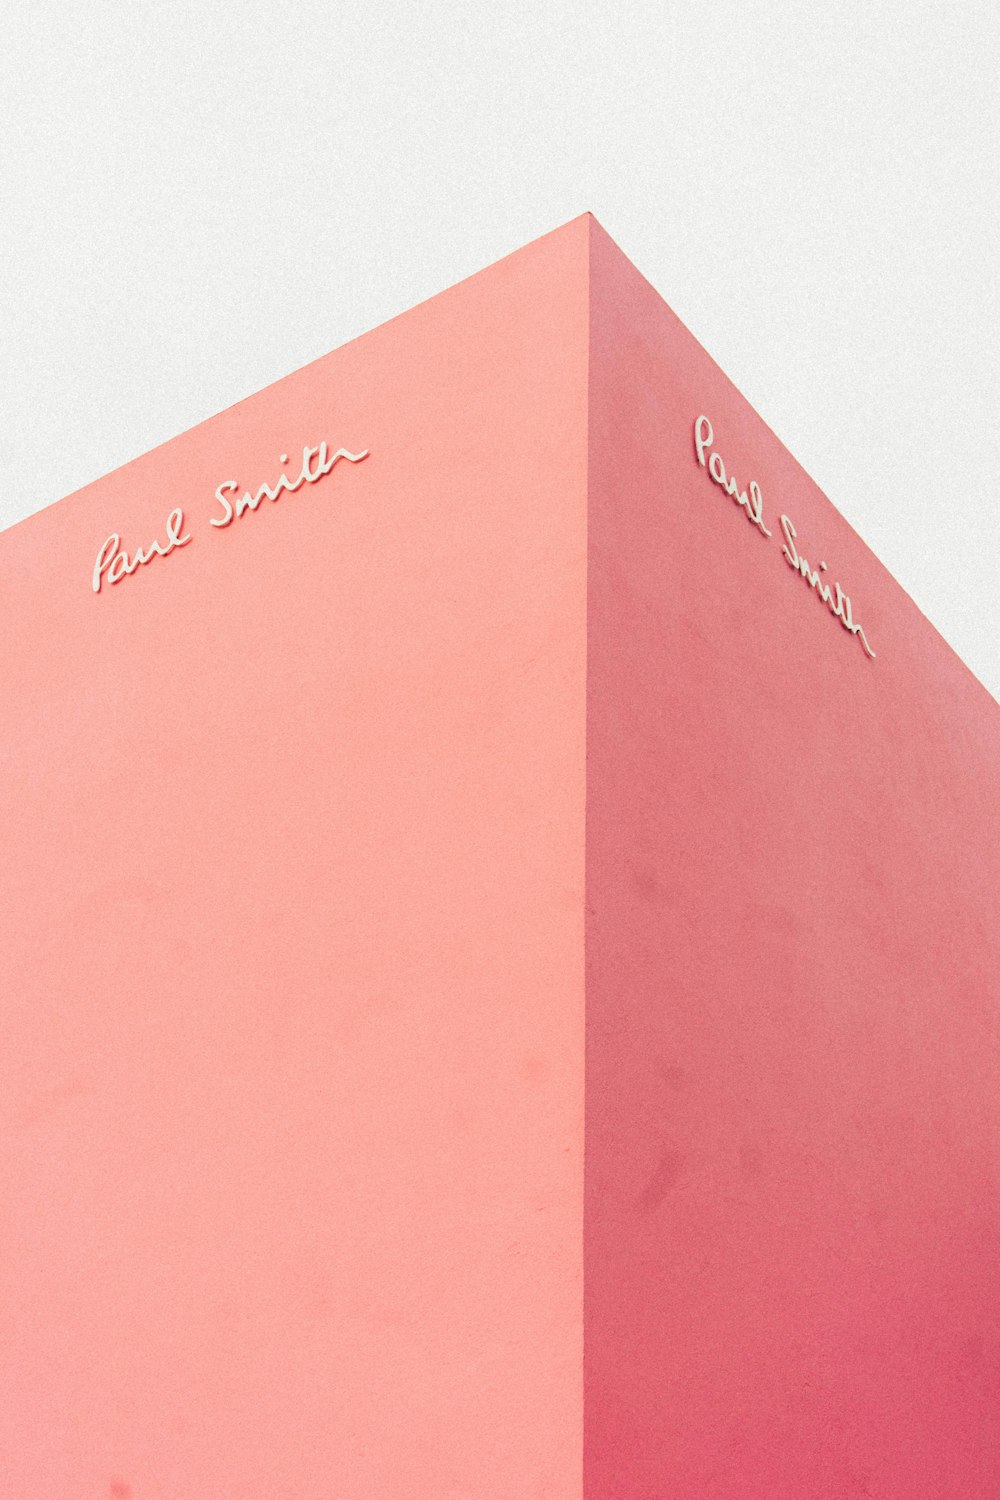 Paul Smith signage on pink wall